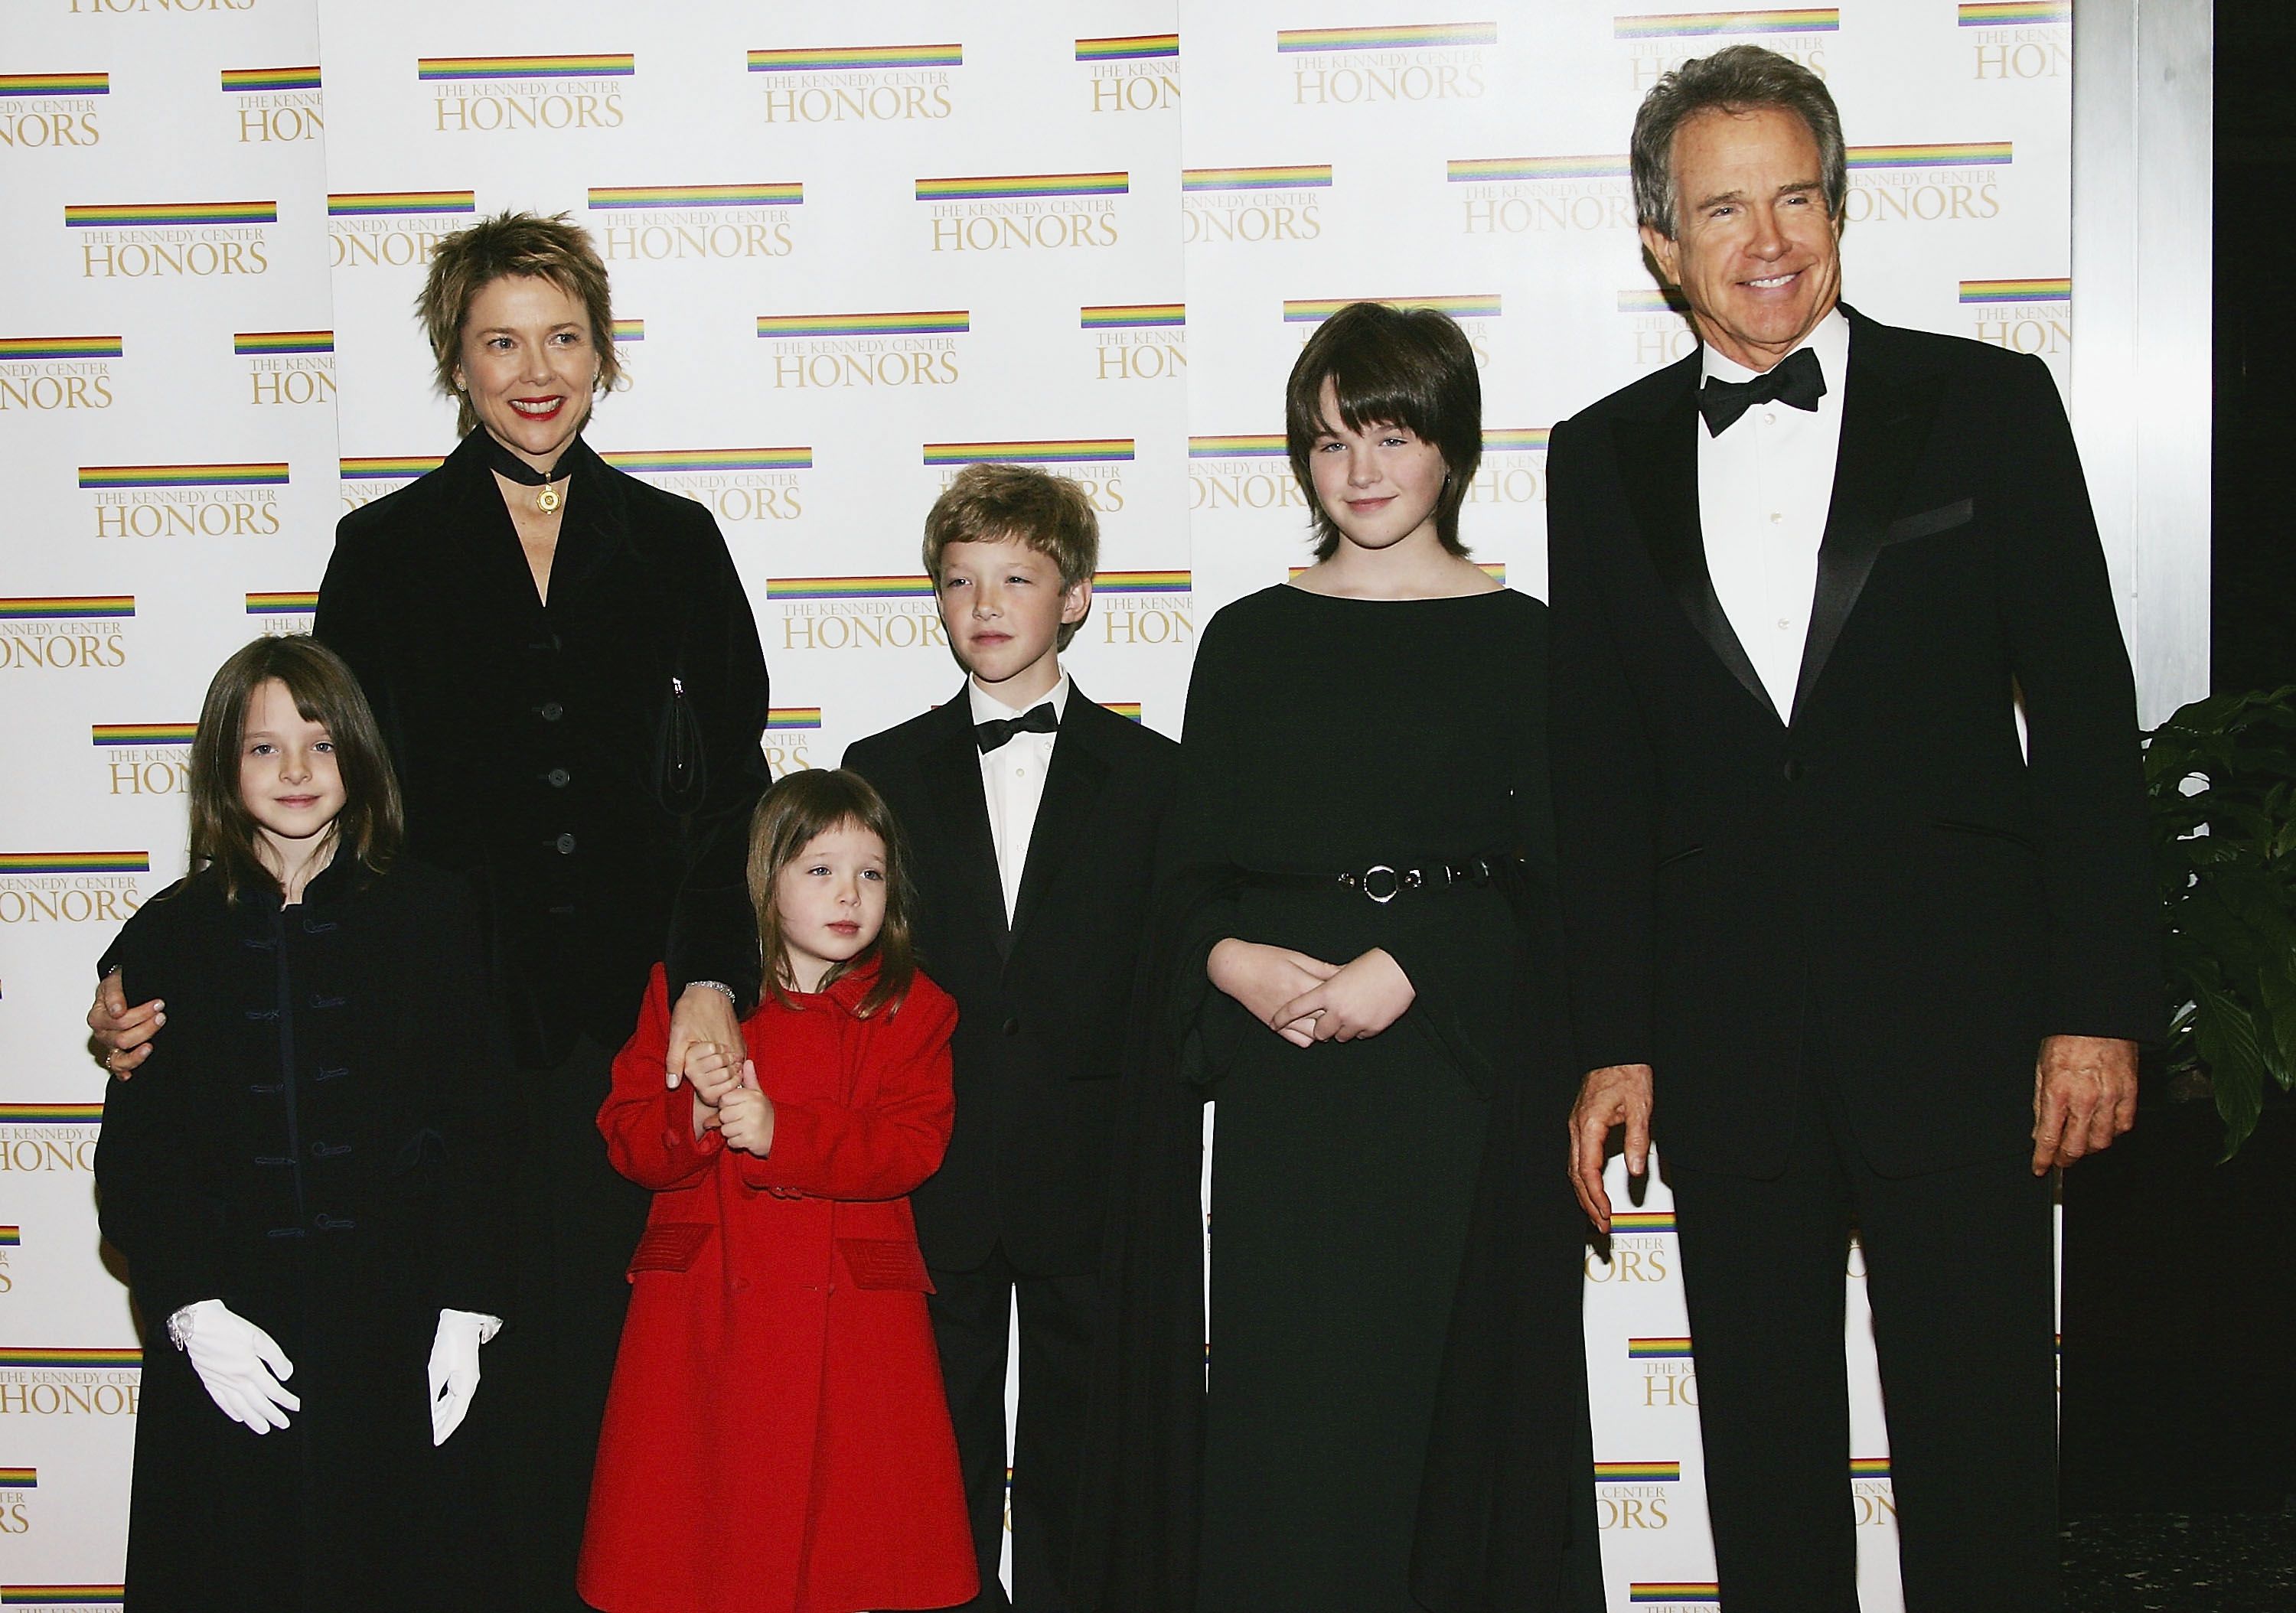 Honoree Warren Beatty poses with wife Annette Bening and children Isabel, Ella, Benjamin, and Kathlyn/Stephen at the 27th Annual Kennedy Center Honors on December 4, 2004, in Washington, DC. | Photo: Evan Agostini/Getty Images